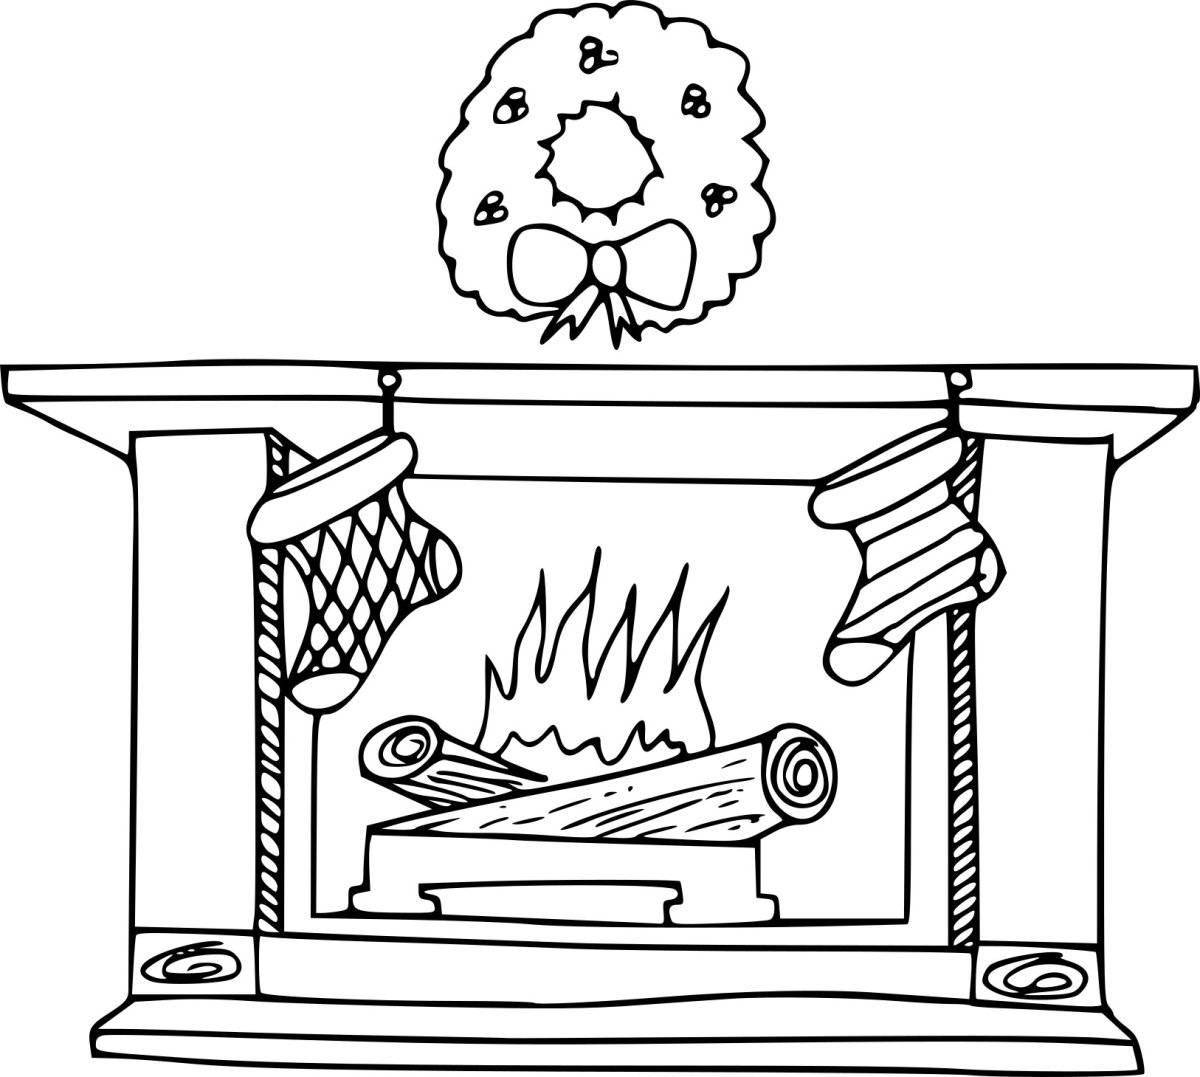 Calm oven coloring page